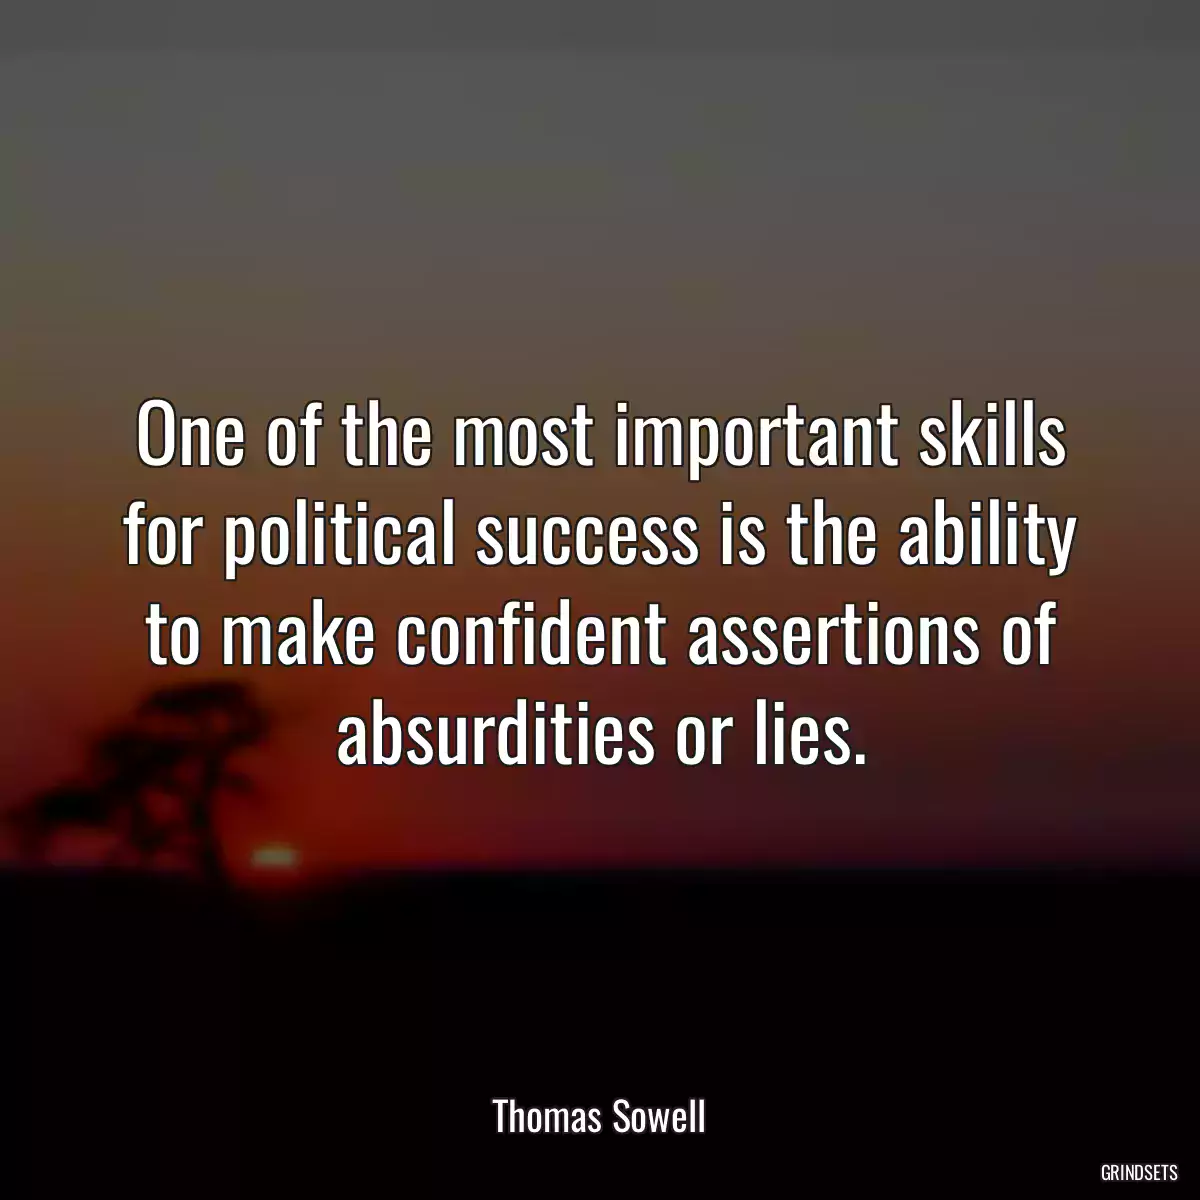 One of the most important skills for political success is the ability to make confident assertions of absurdities or lies.